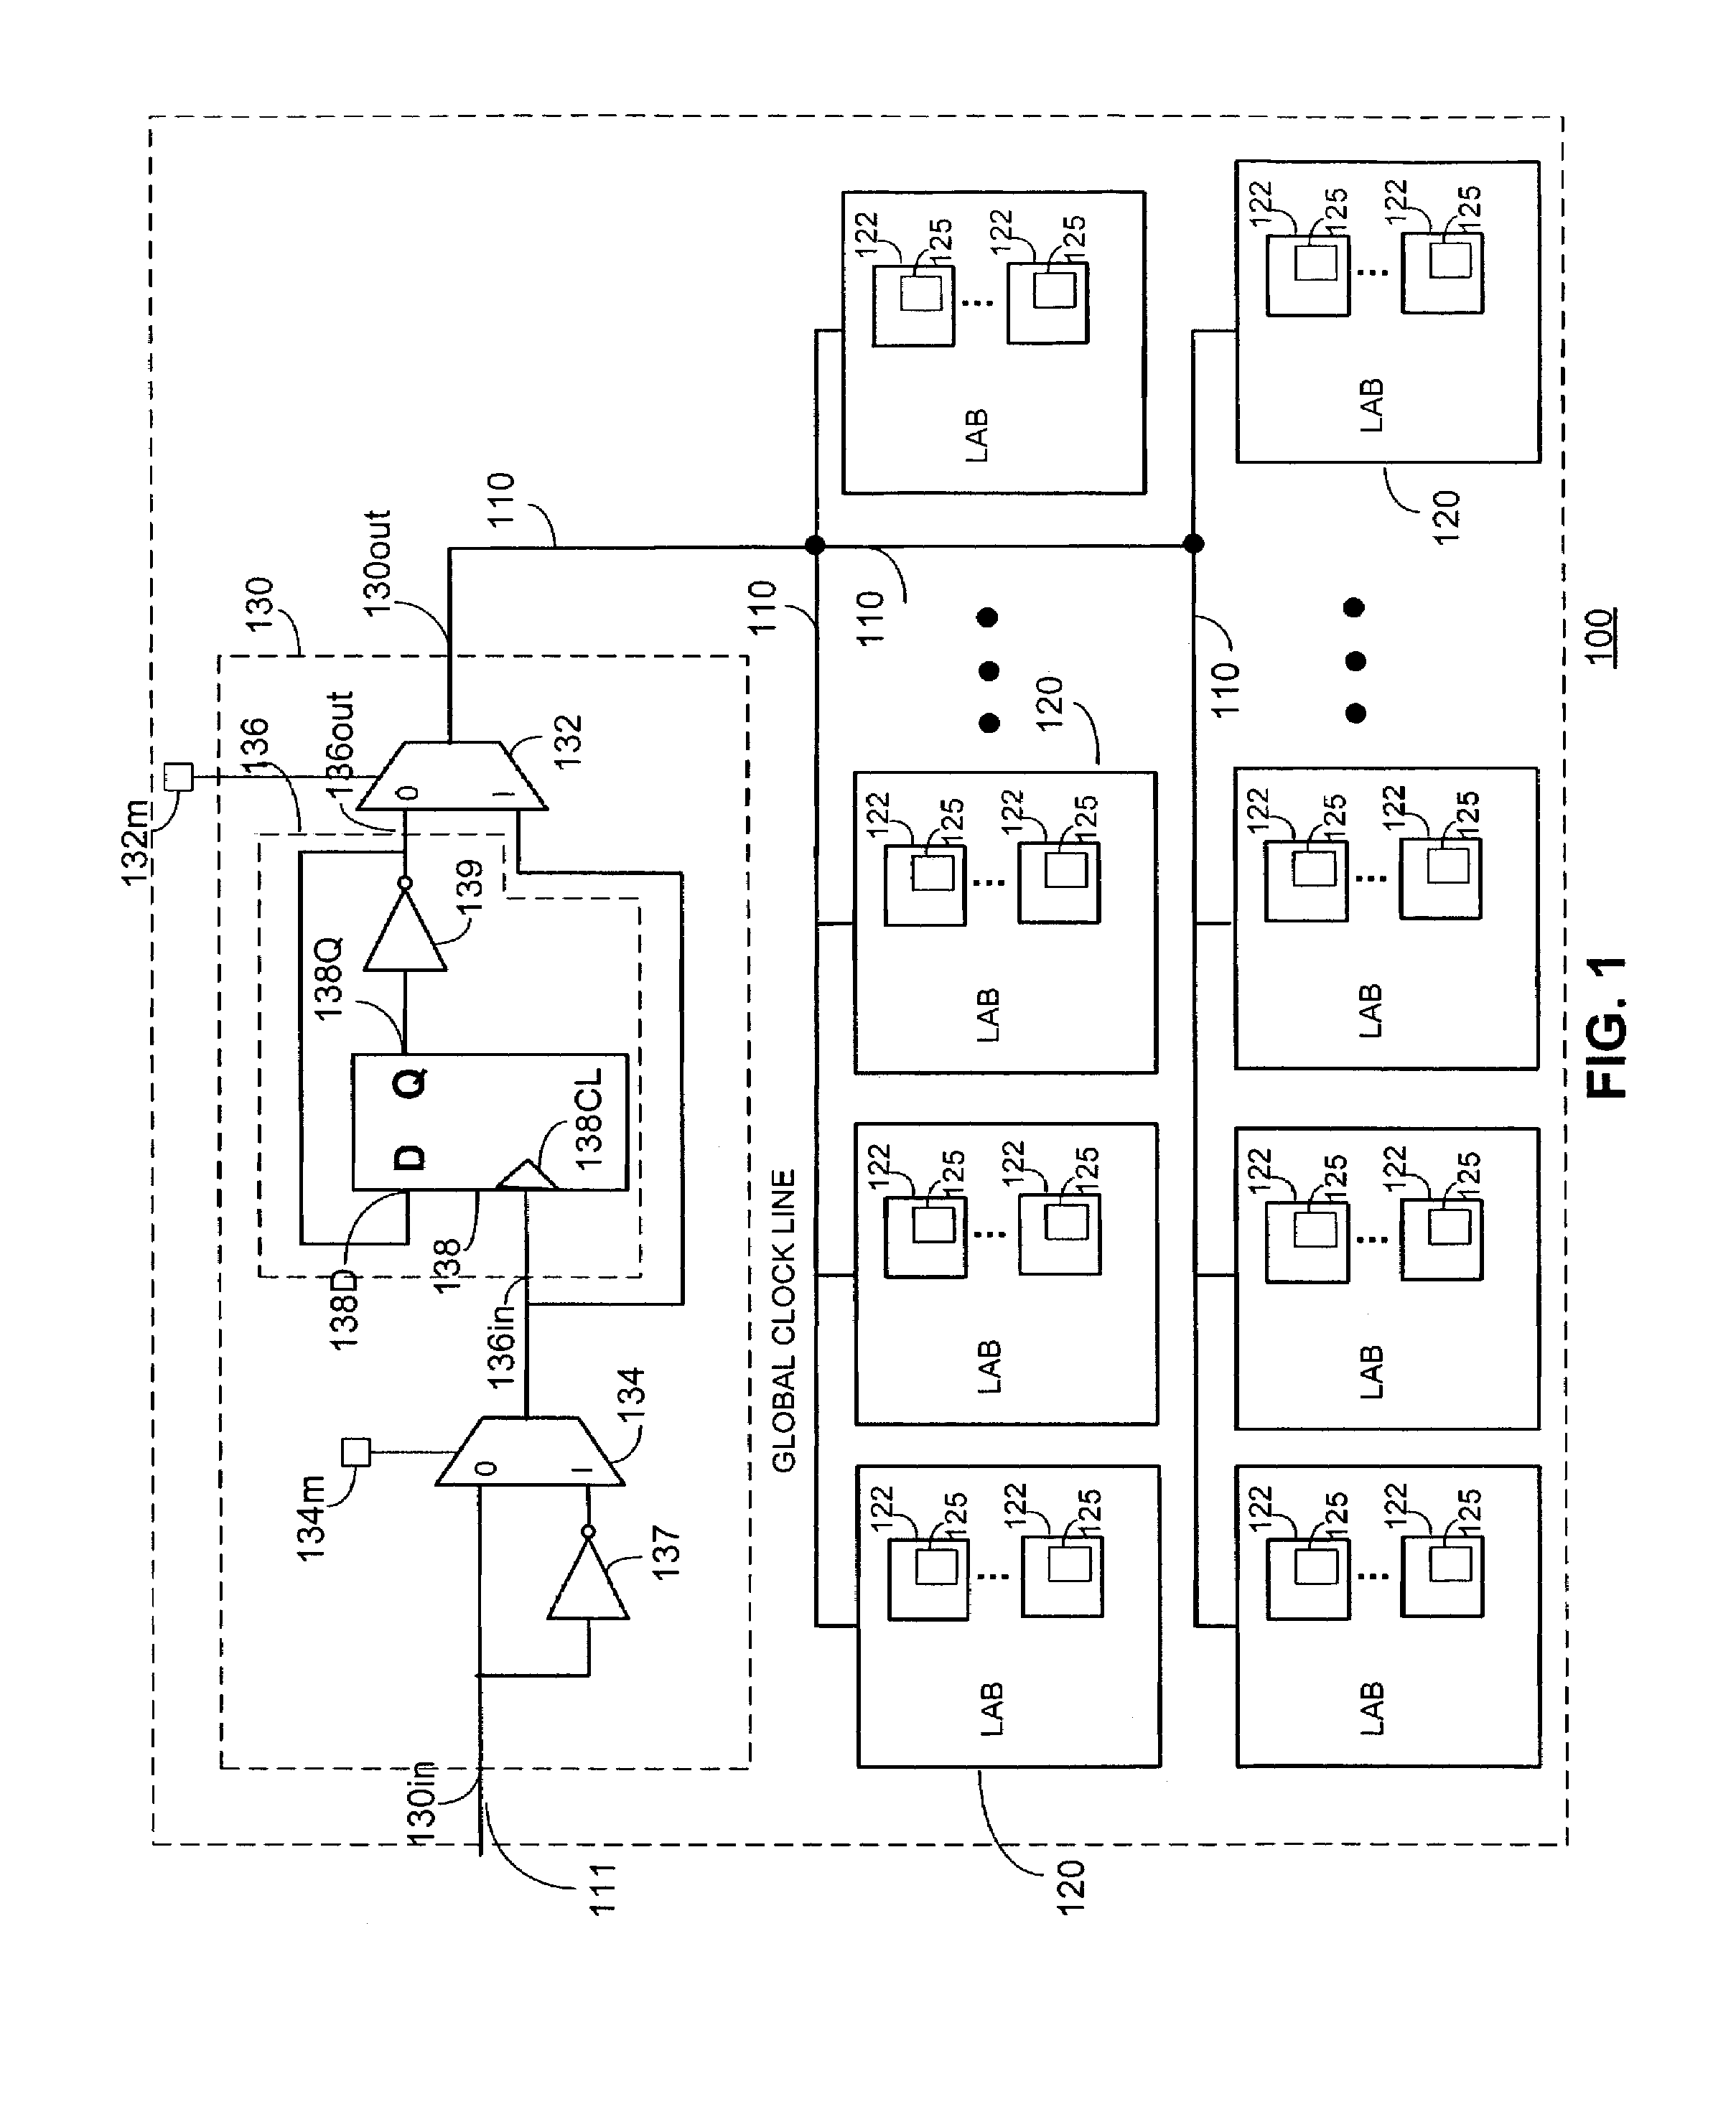 Reduced power consumption clock network